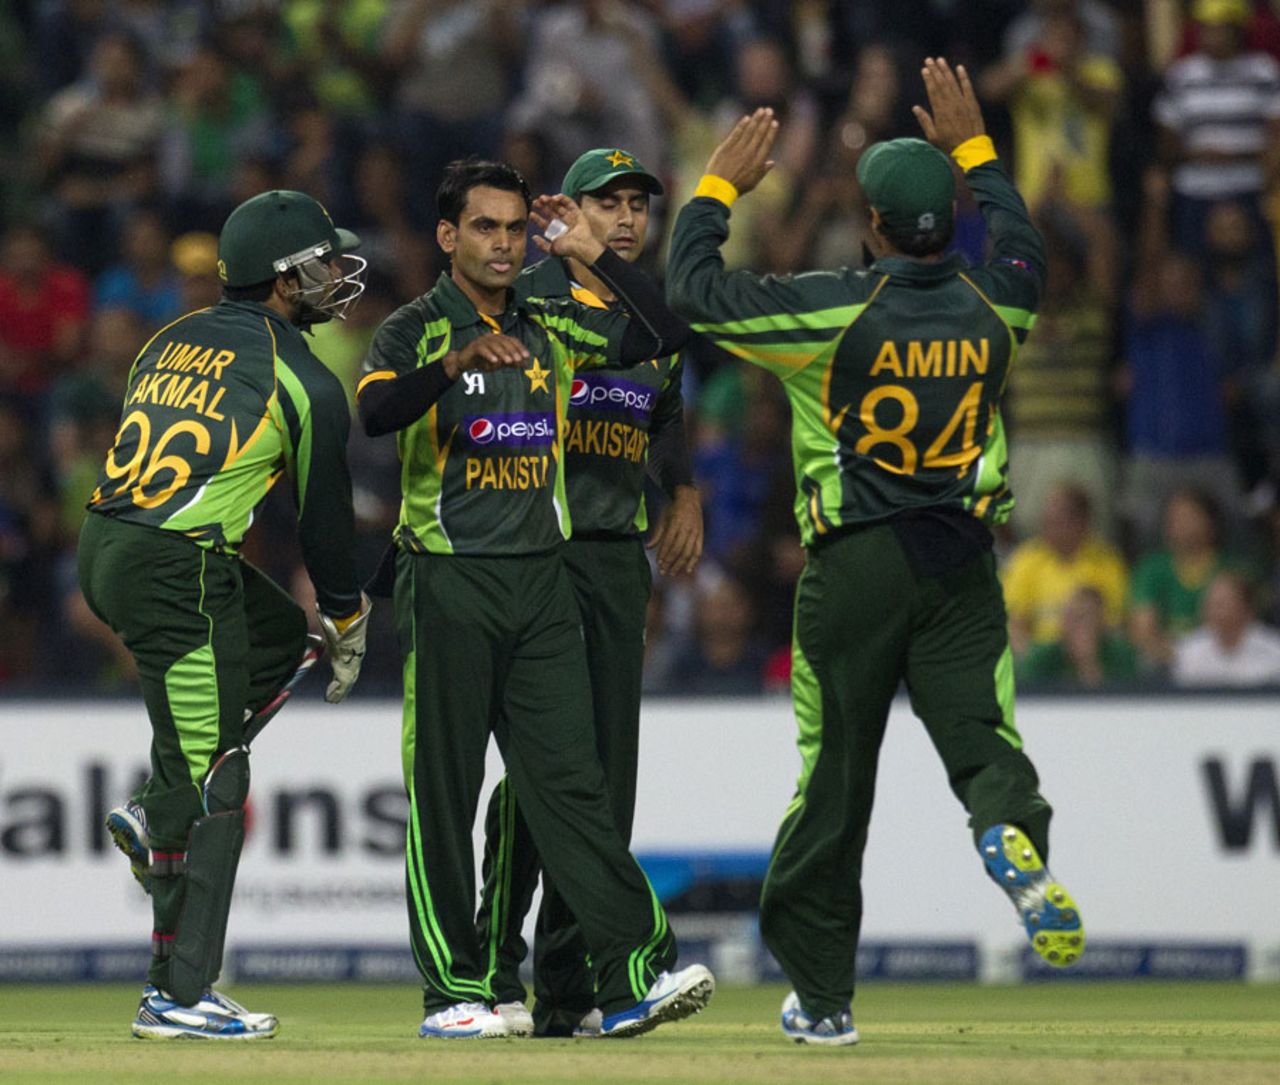 Mohammad Hafeez finished with 2 for 25, South Africa v Pakistan, 1st T20I, Johannesburg, November 20, 2013